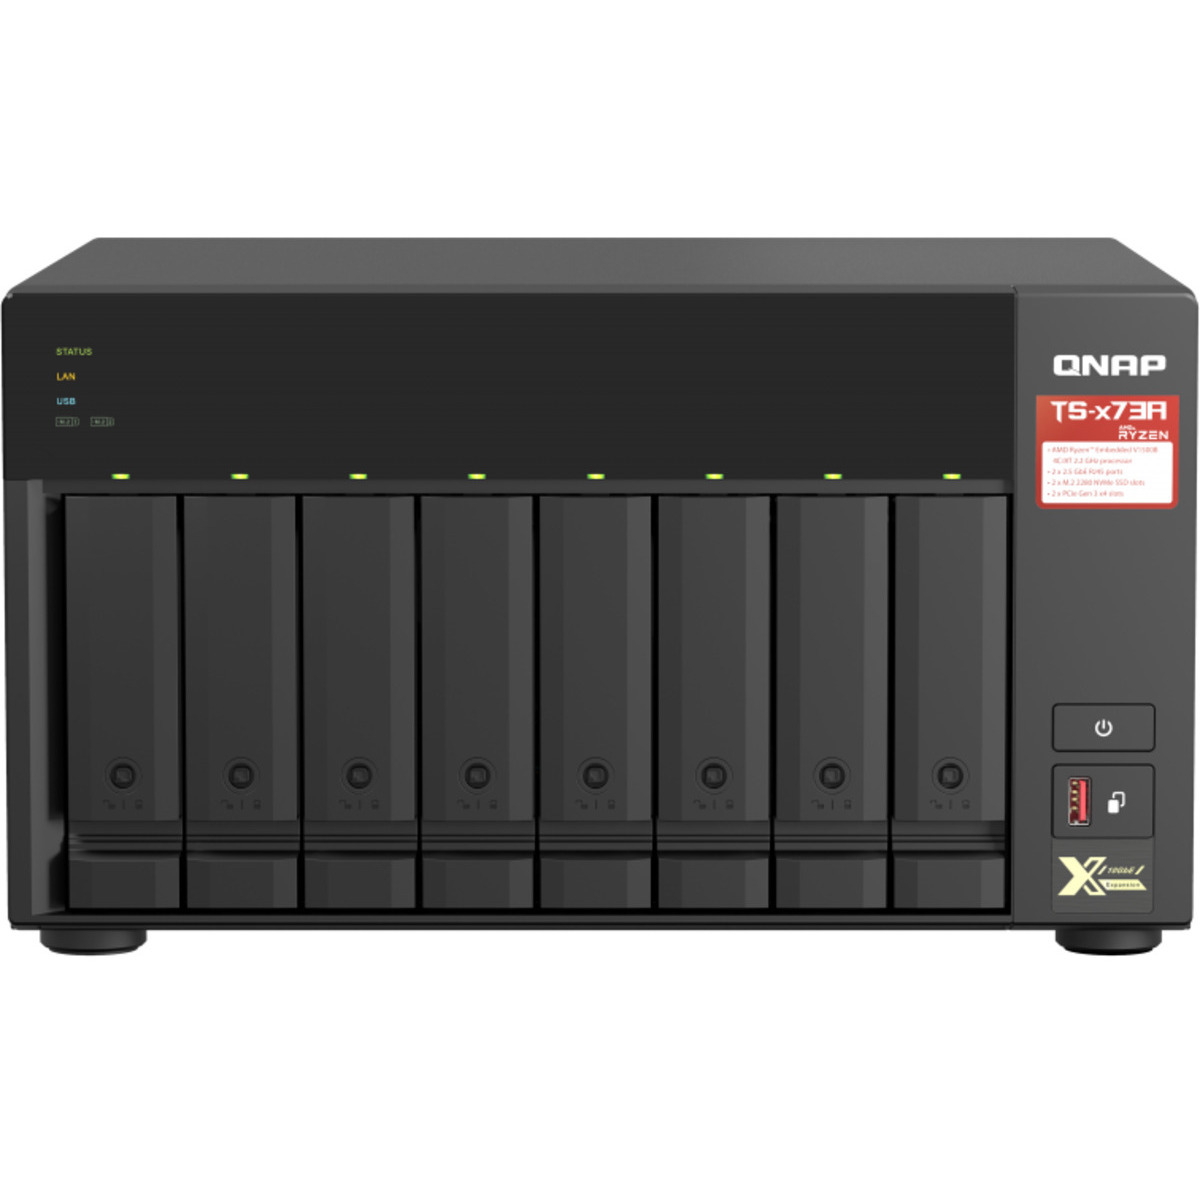 QNAP TS-873A 48tb 8-Bay Desktop Multimedia / Power User / Business NAS - Network Attached Storage Device 8x6tb Western Digital Red Pro WD6005FFBX 3.5 7200rpm SATA 6Gb/s HDD NAS Class Drives Installed - Burn-In Tested TS-873A